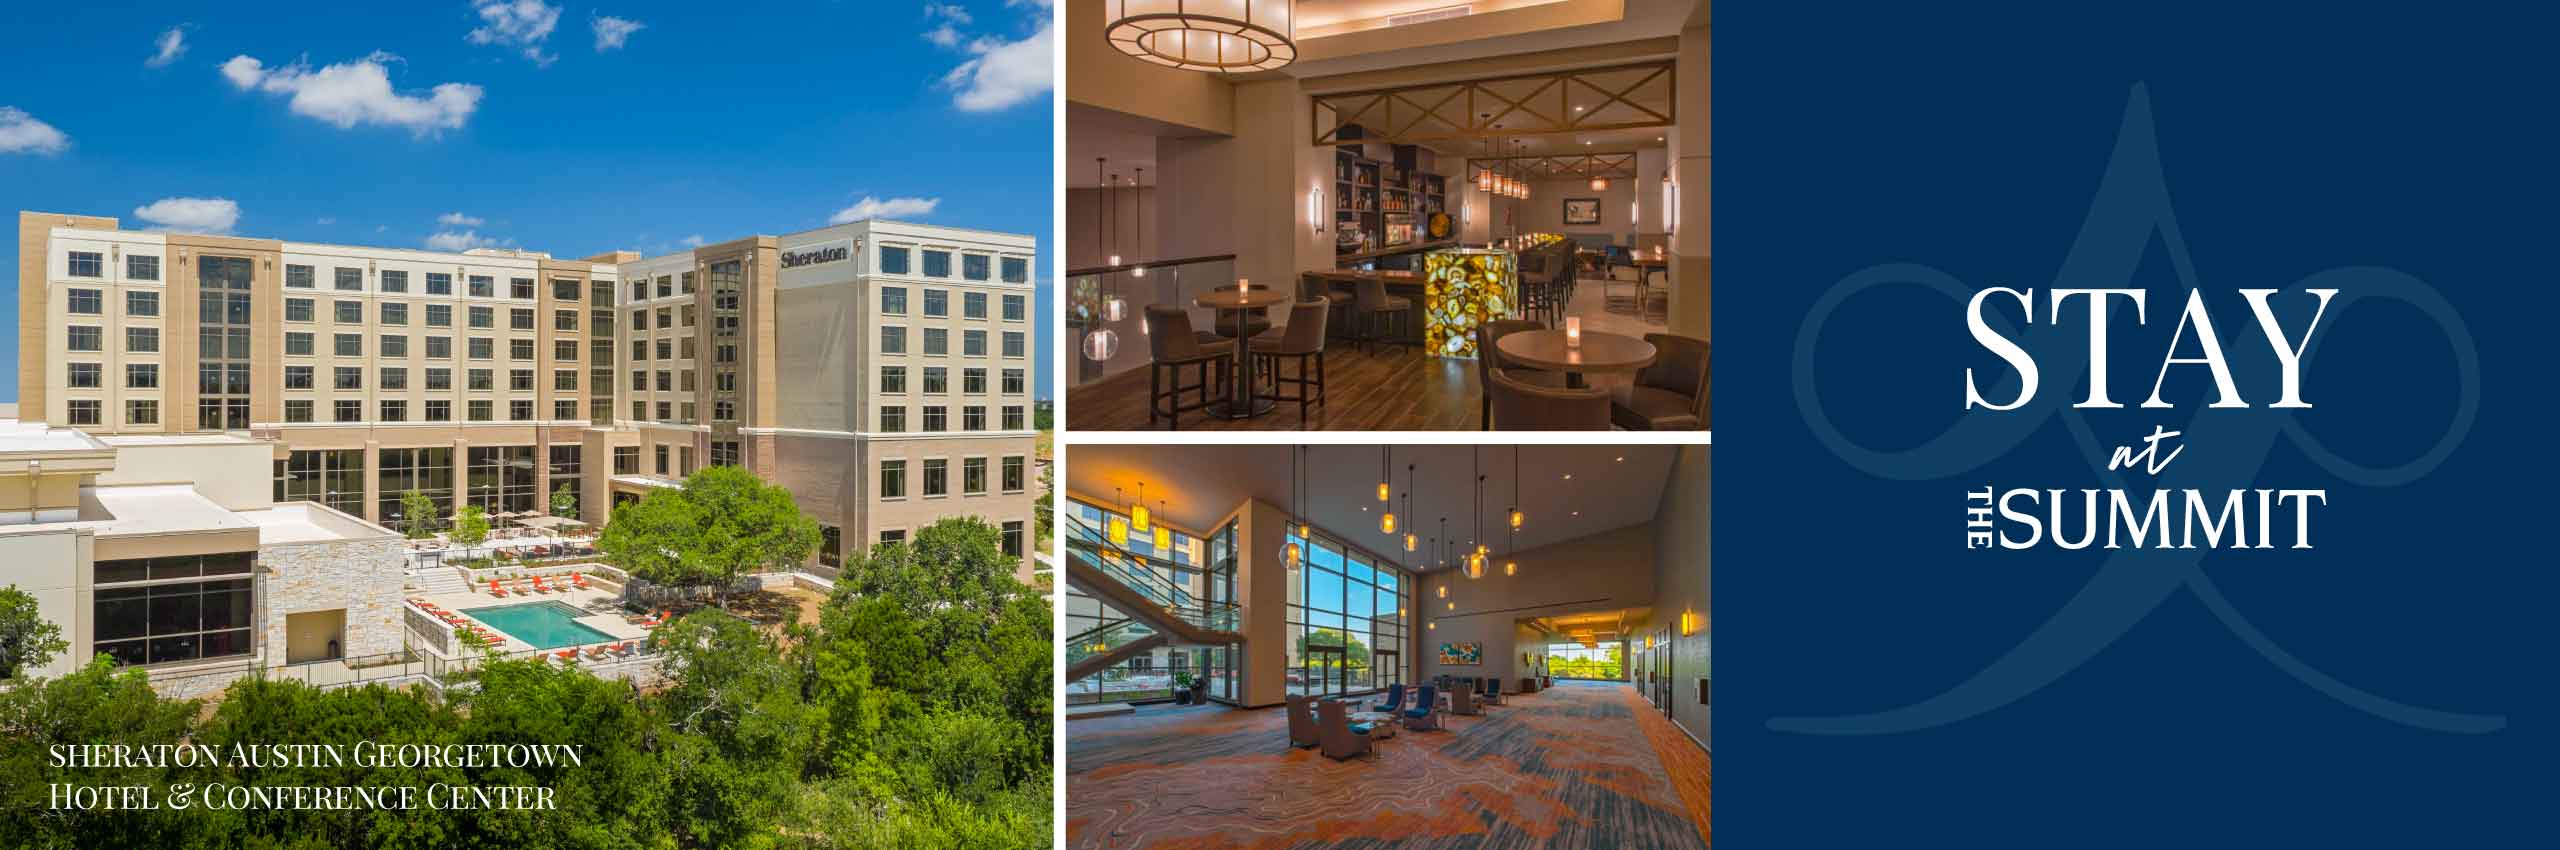 Stay at The Summit - Sheraton Austin Georgetown Hotel & Conference Center